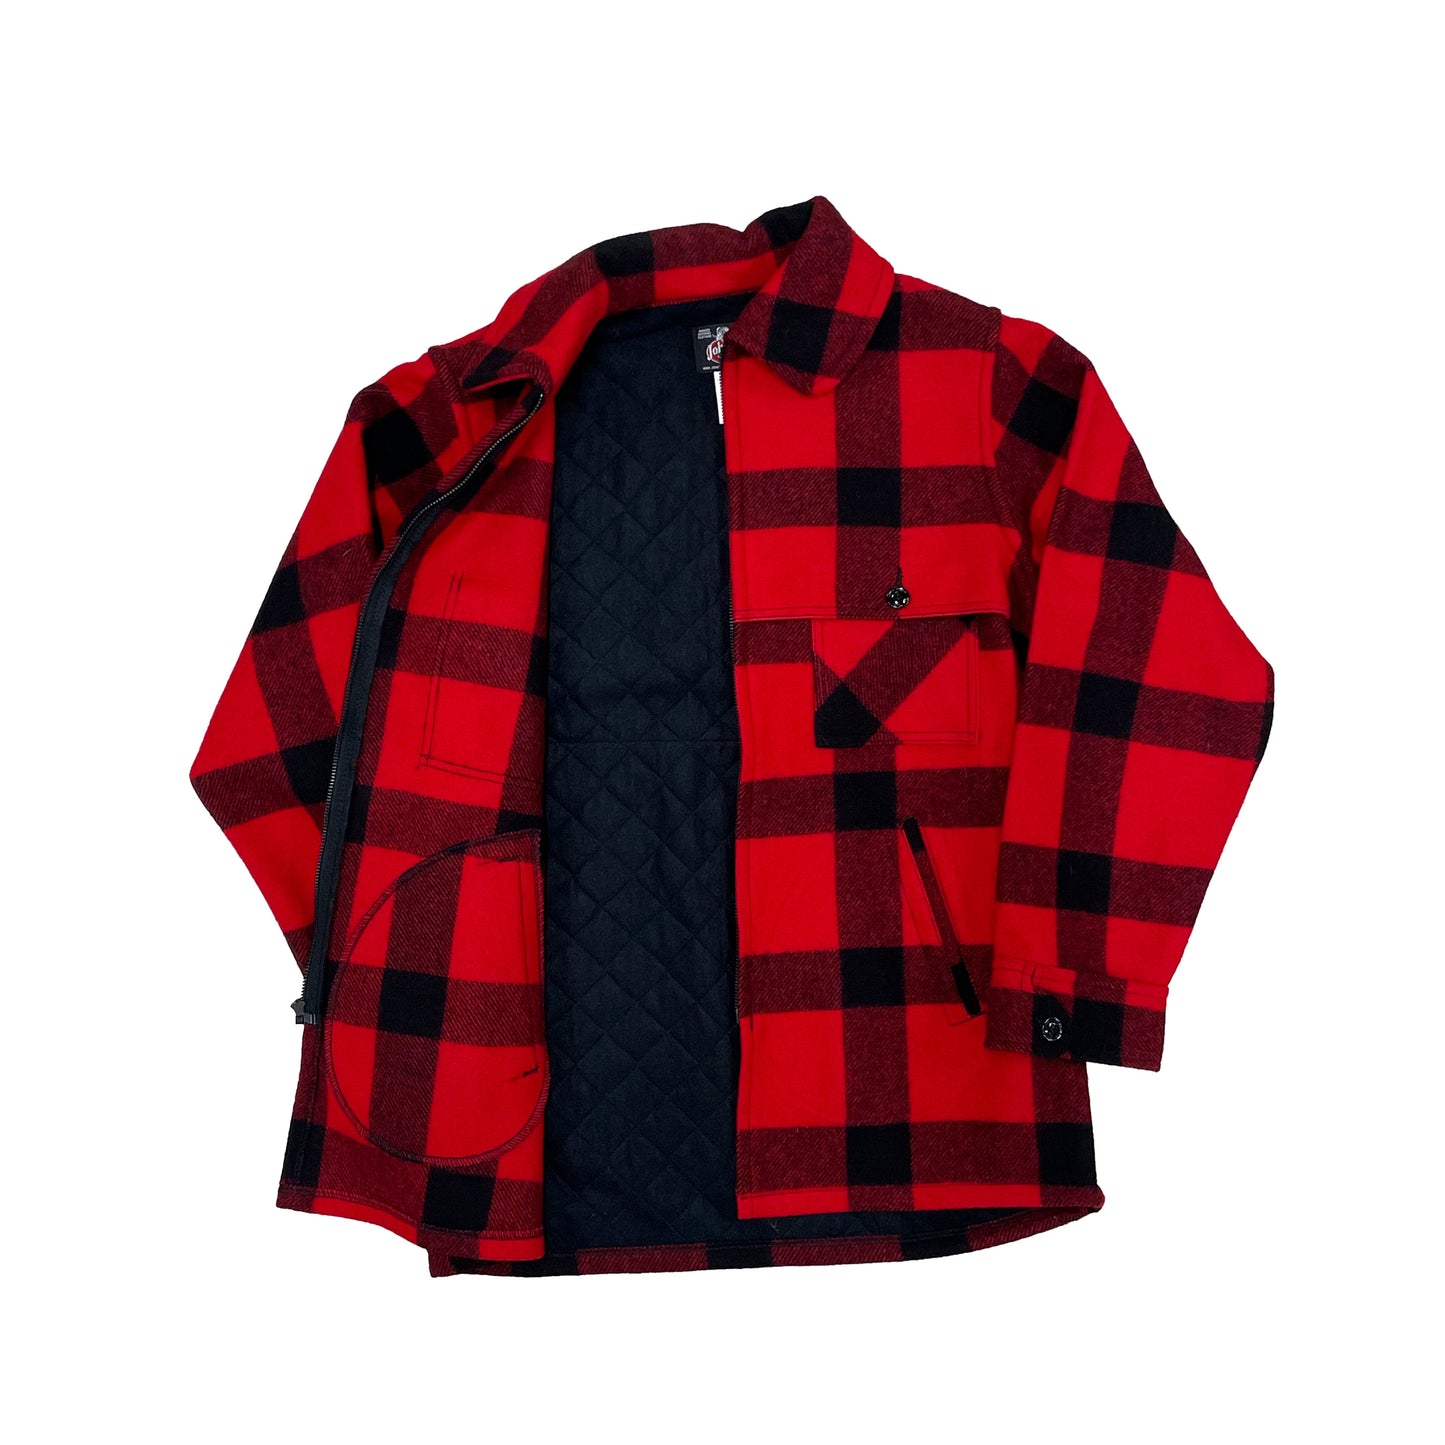 Johnson Woolen Mills Cruiser jacket in Red and black buffalo check  interior view with tricot lining